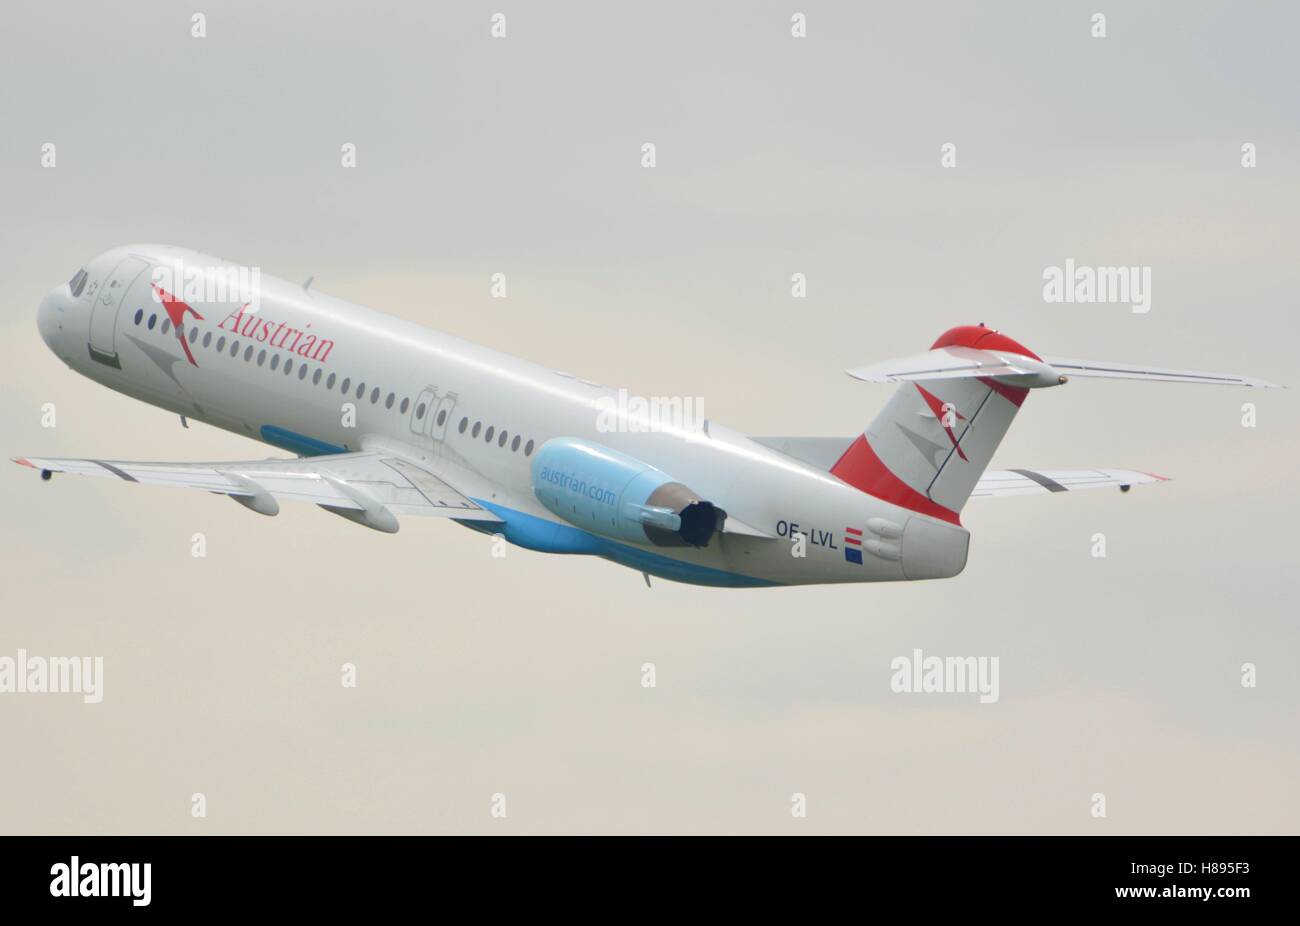 Fokker 100 taking to the skies Stock Photo